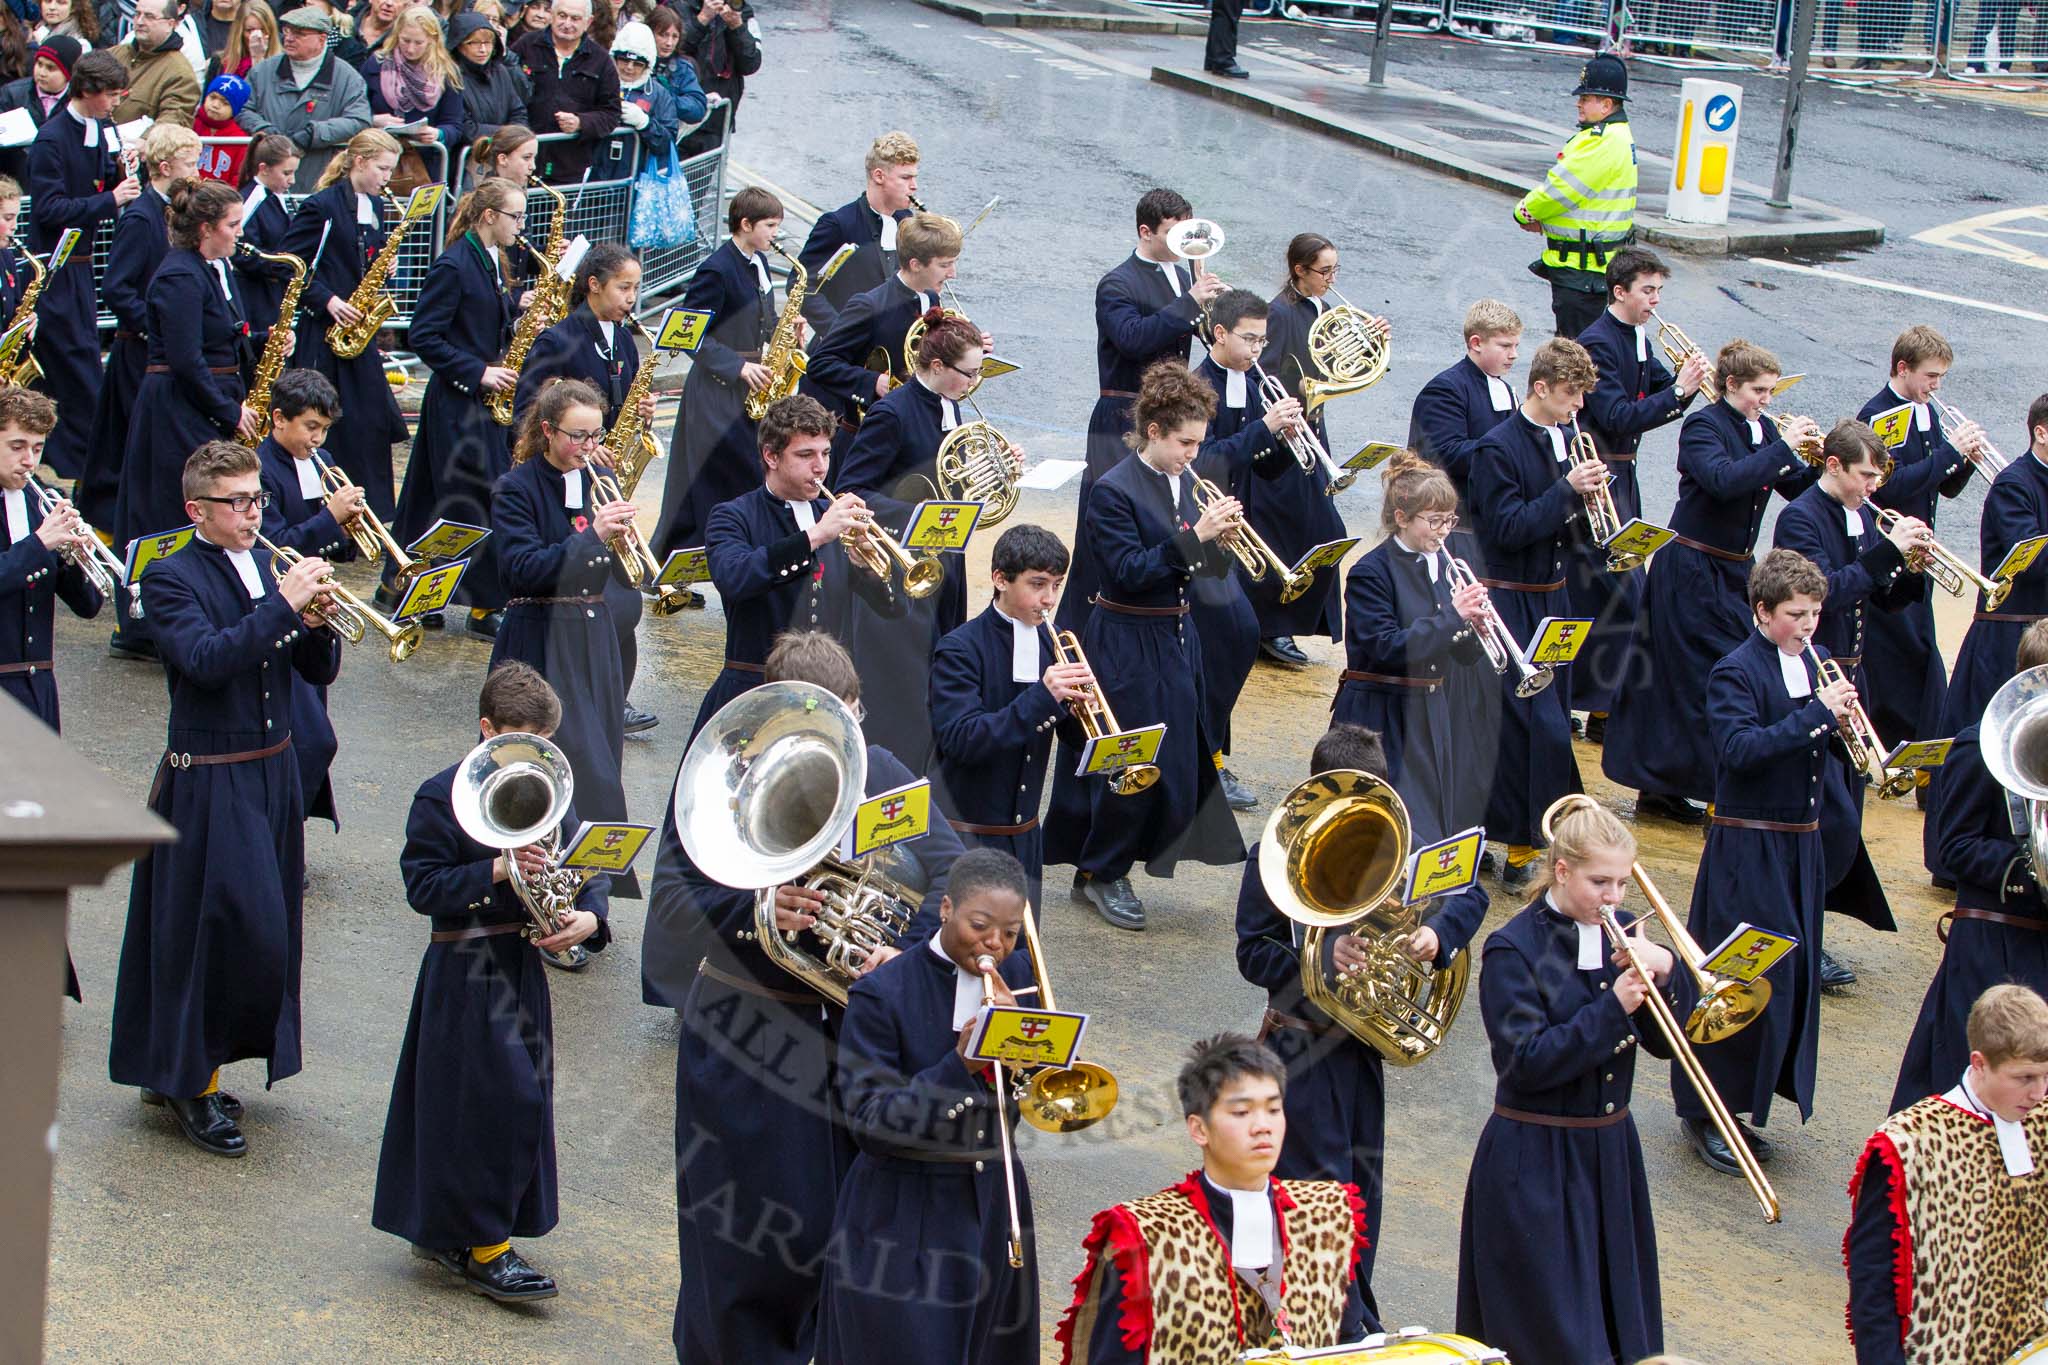 Lord Mayor's Show 2012: Entry 123 - Christ's Hospital School Band..
Press stand opposite Mansion House, City of London,
London,
Greater London,
United Kingdom,
on 10 November 2012 at 12:02, image #1769